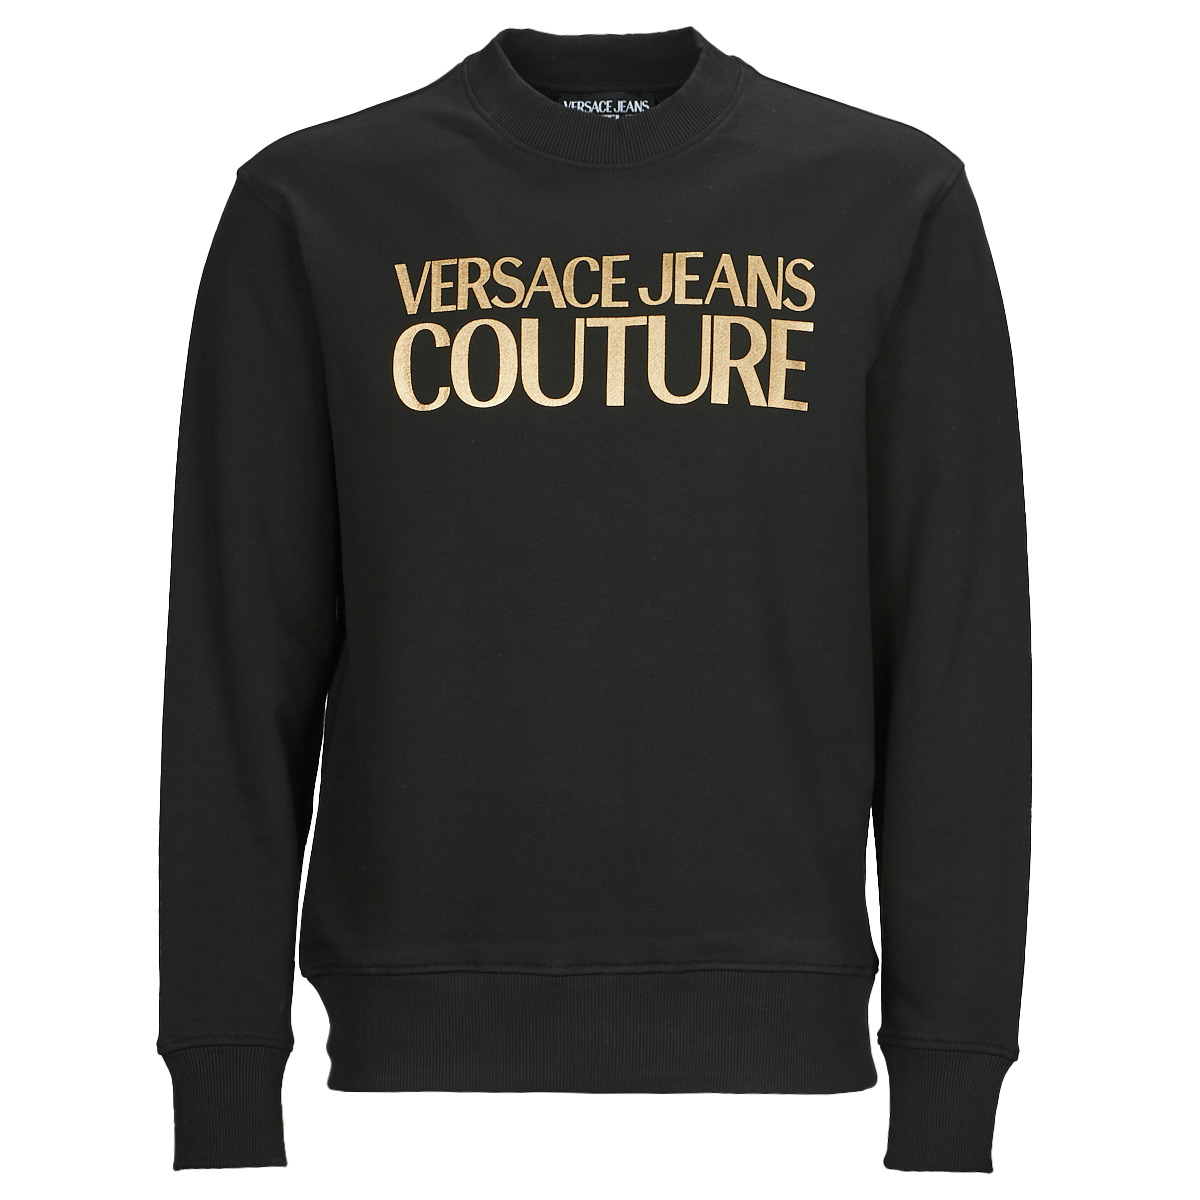 Versace Jeans Couture Felpe Sweater